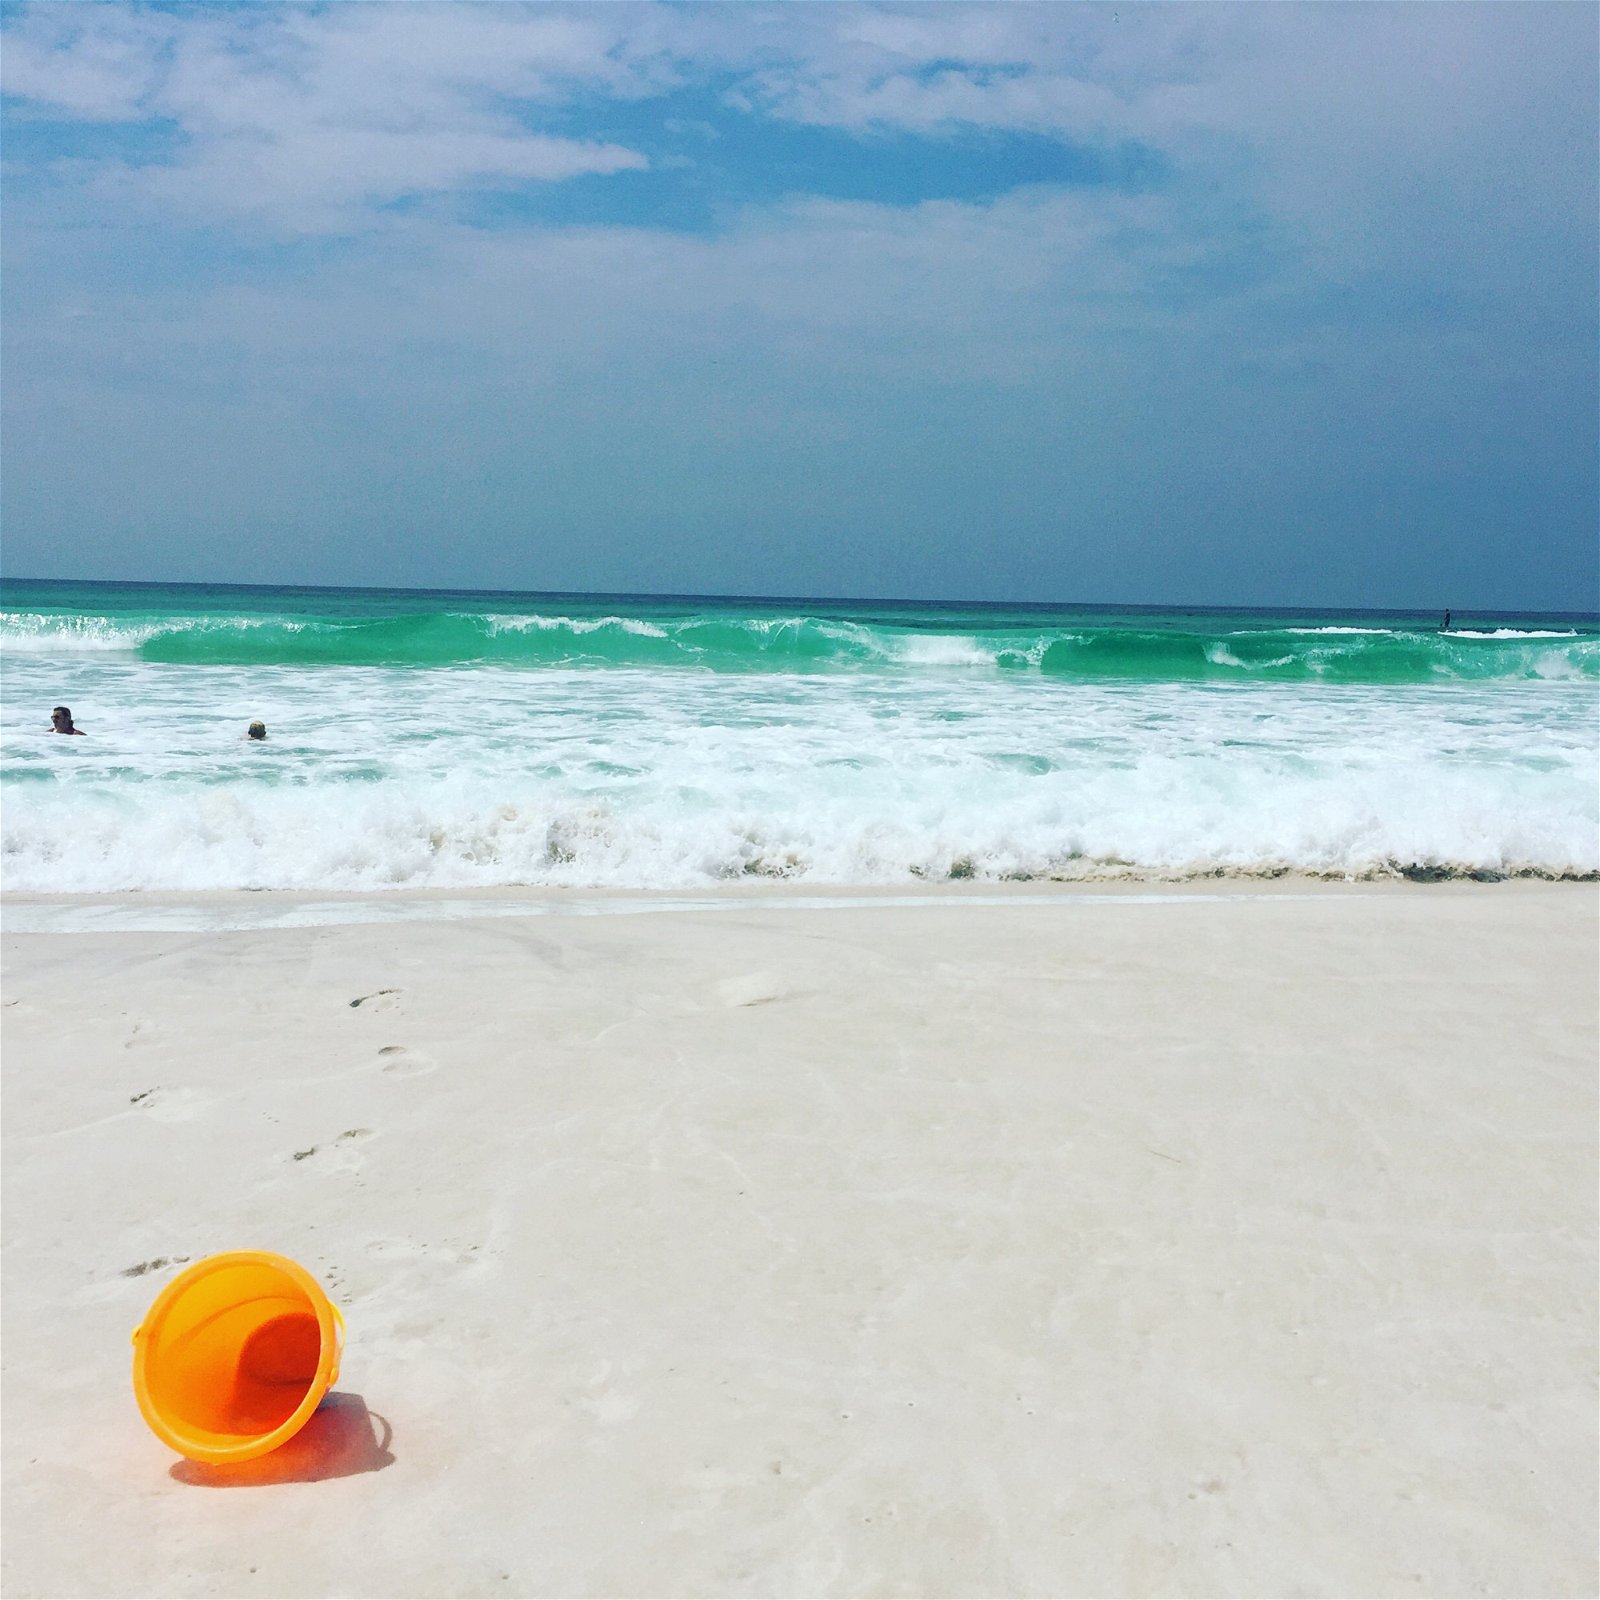 Orange pail on the beach with the ocean and a deep blue sky in the background